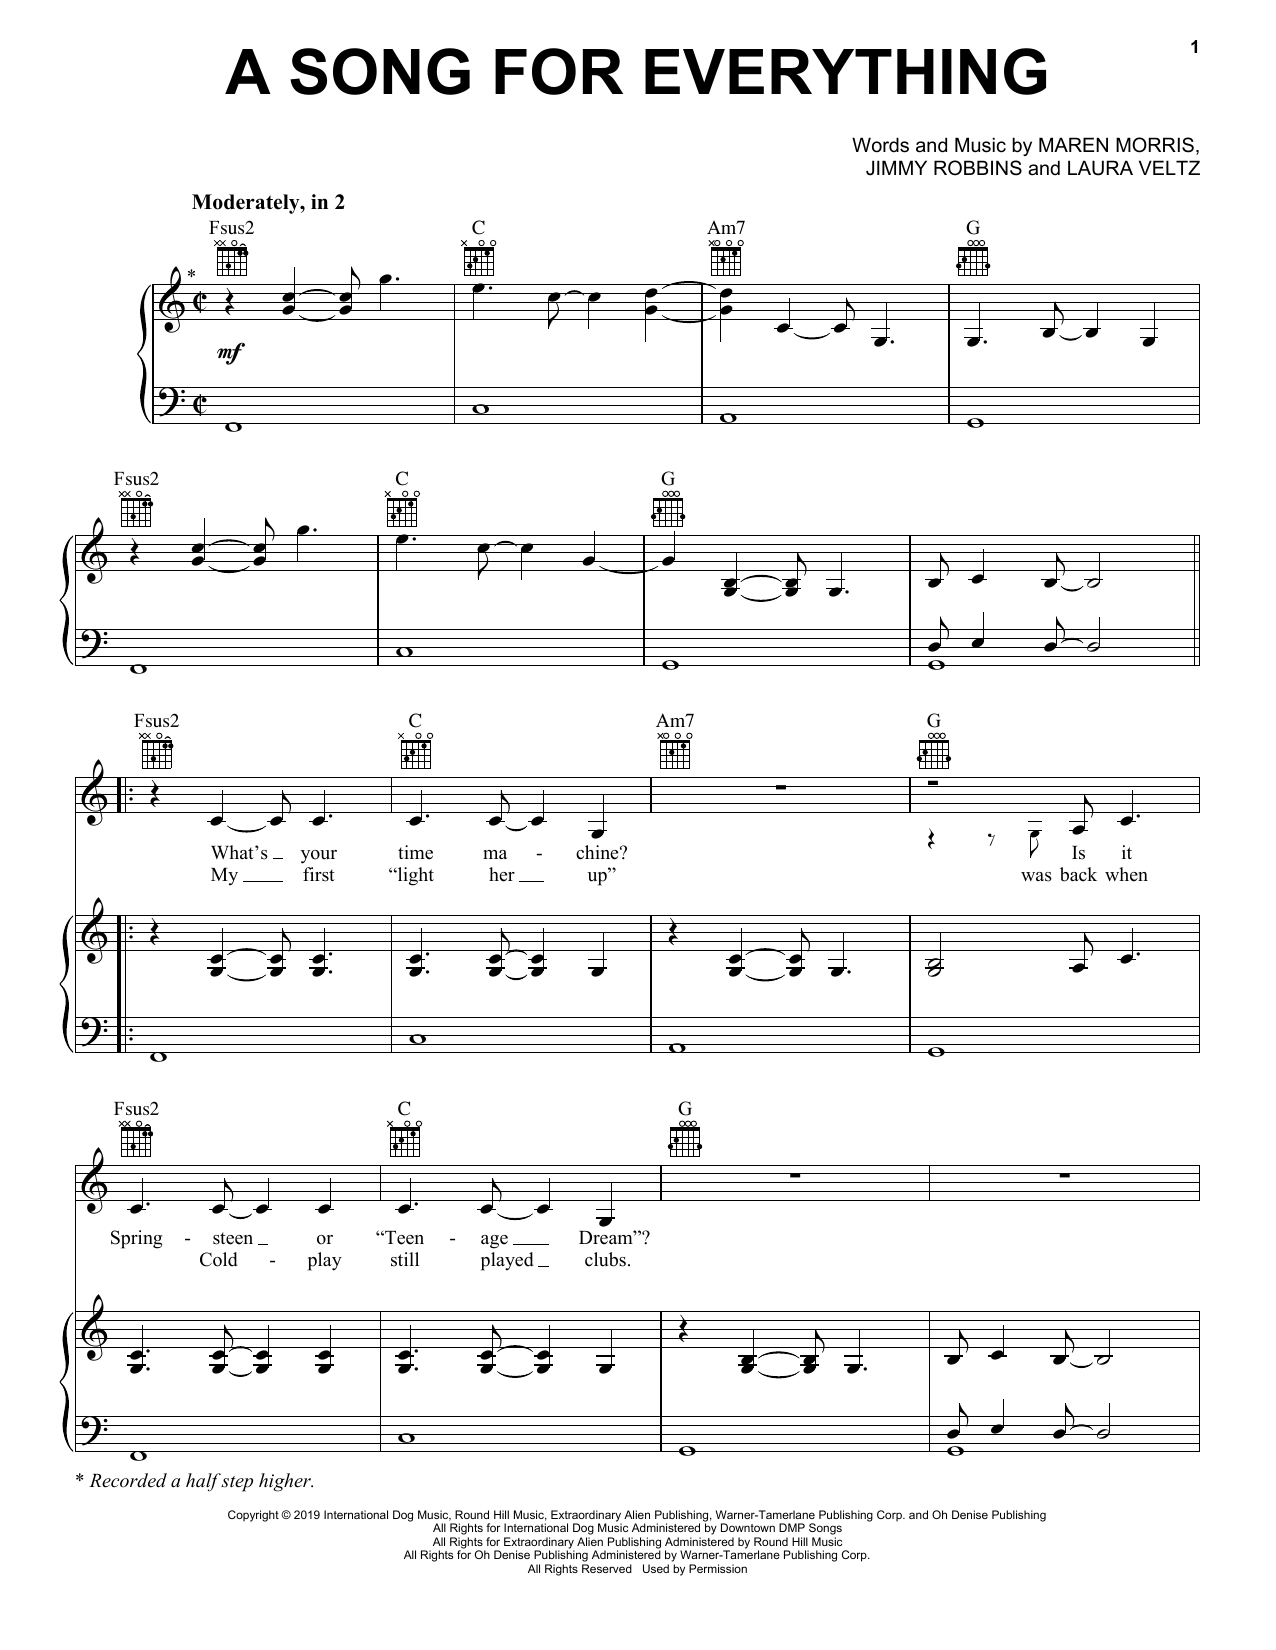 Download Maren Morris A Song For Everything Sheet Music